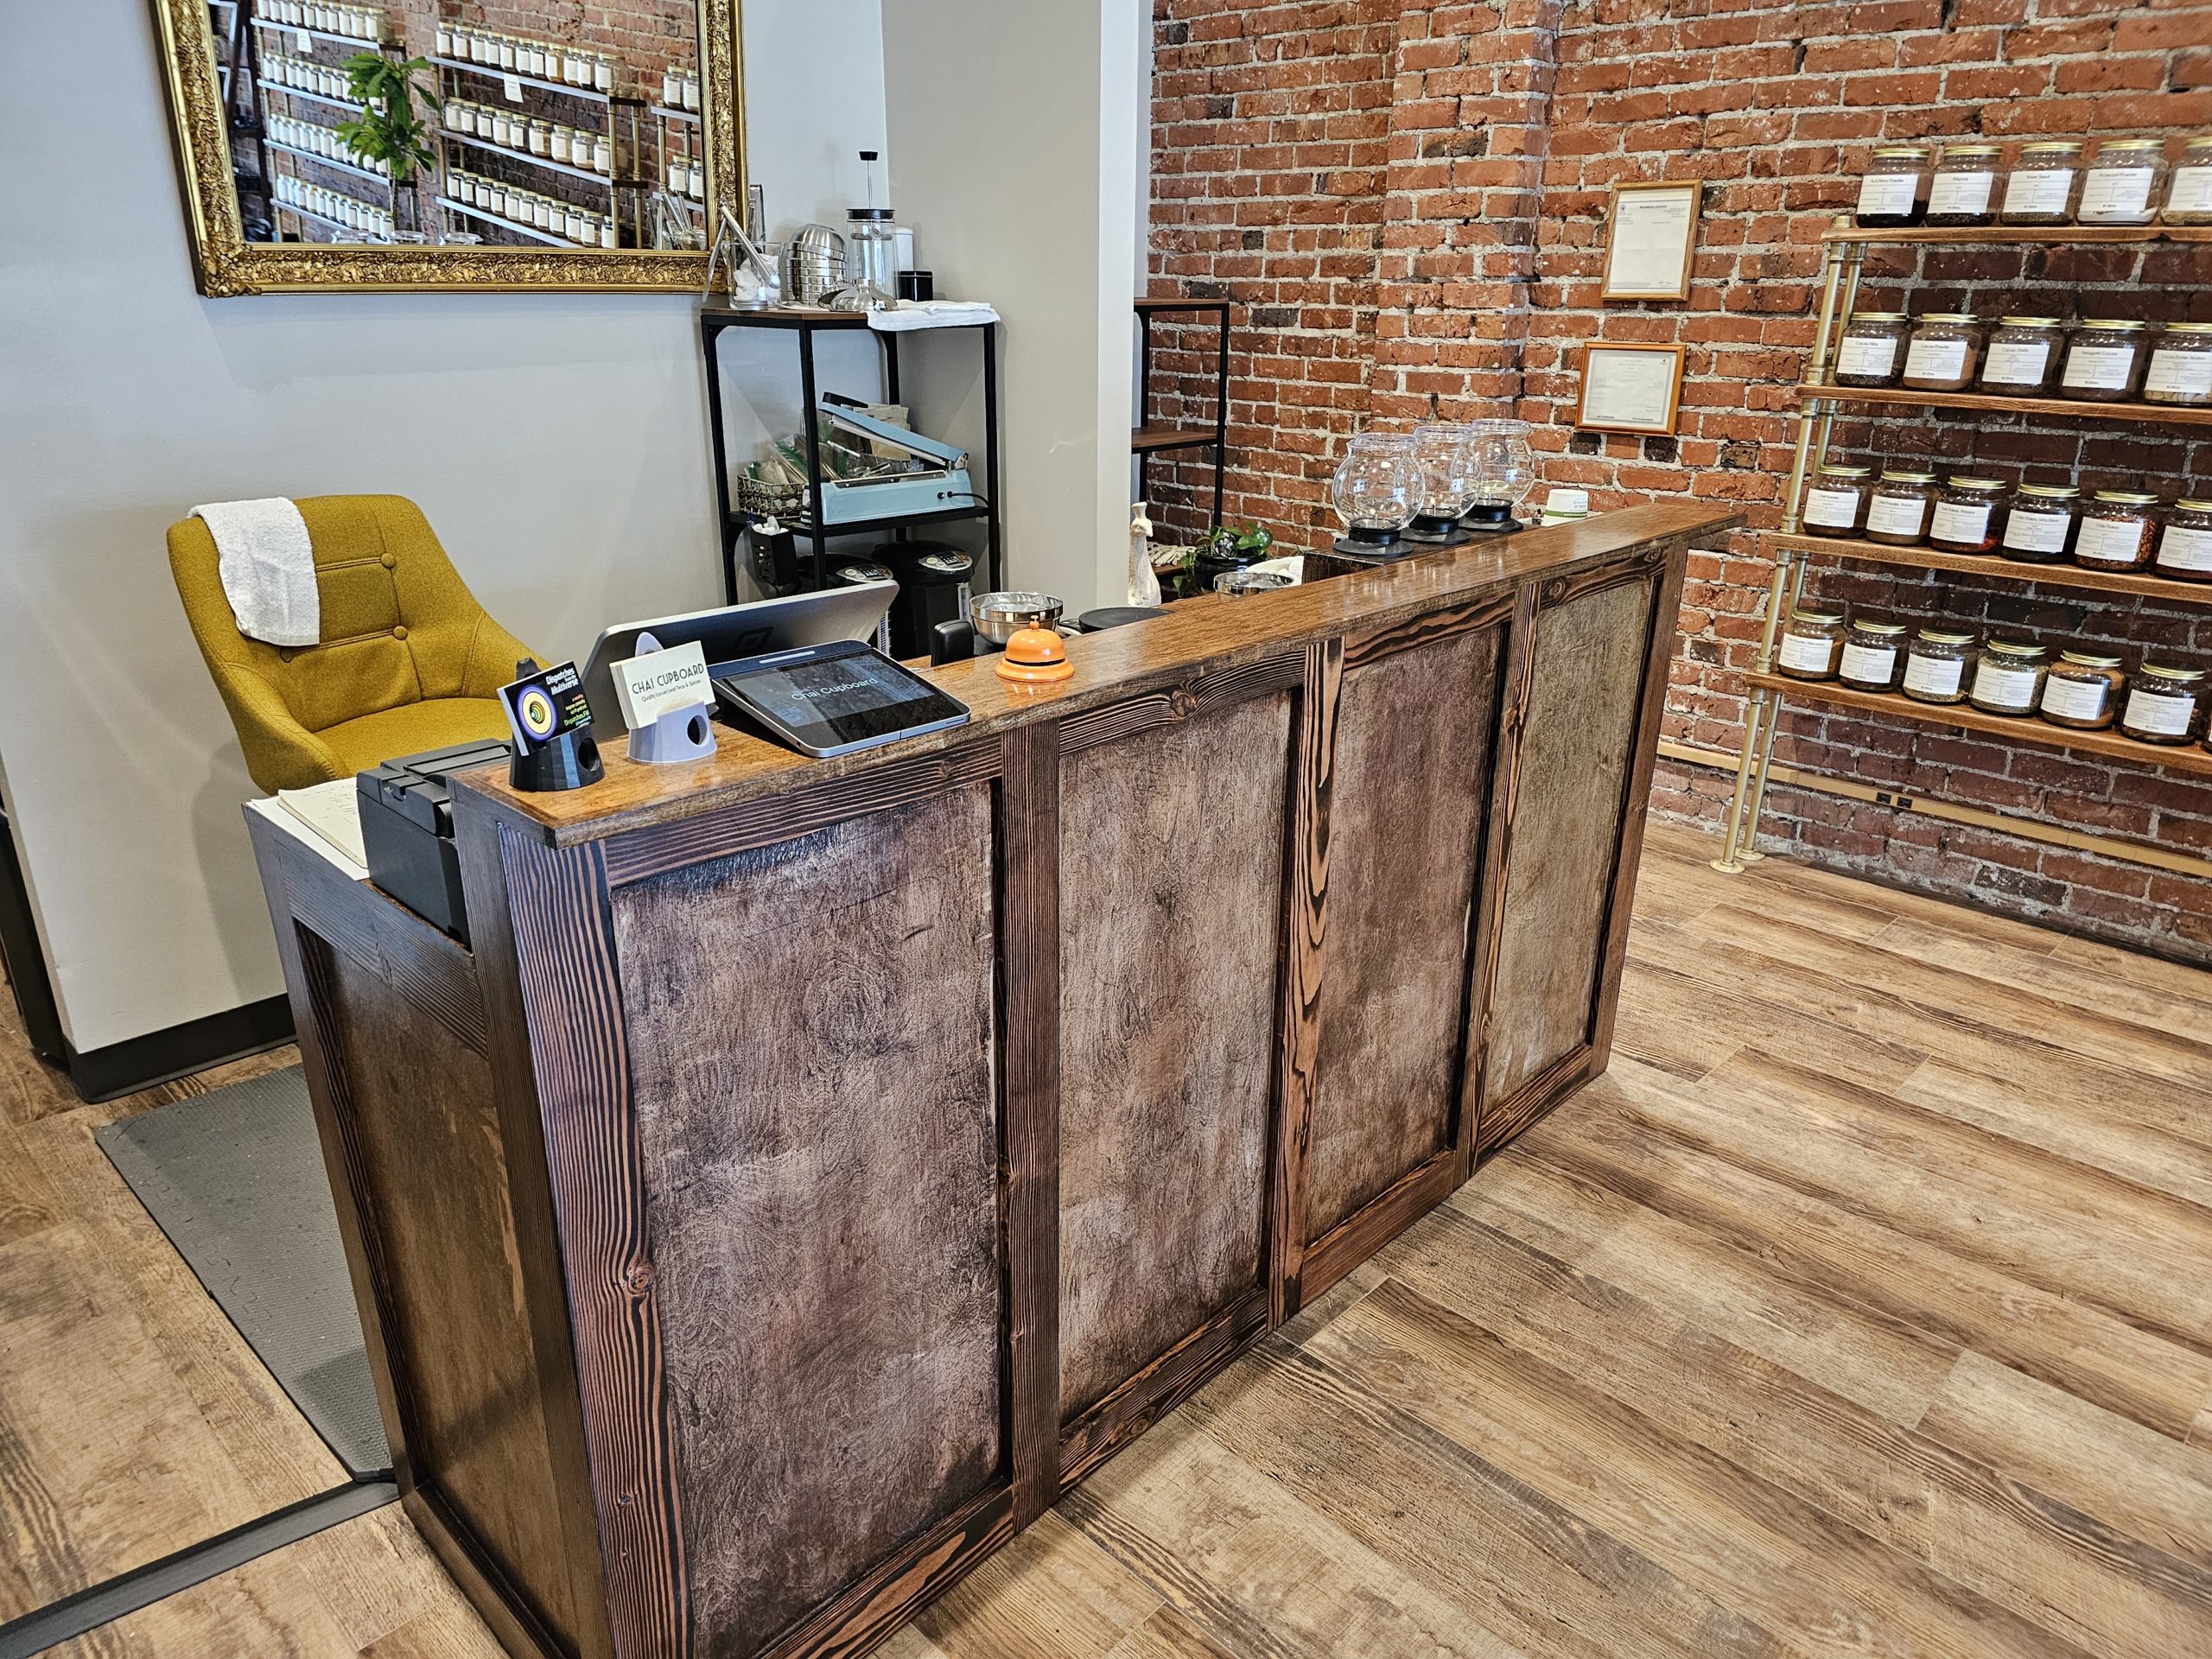 a custom-built wooden counter holding a register and some tea brewers, in a shop with brick walls and a shelf with jars in the background